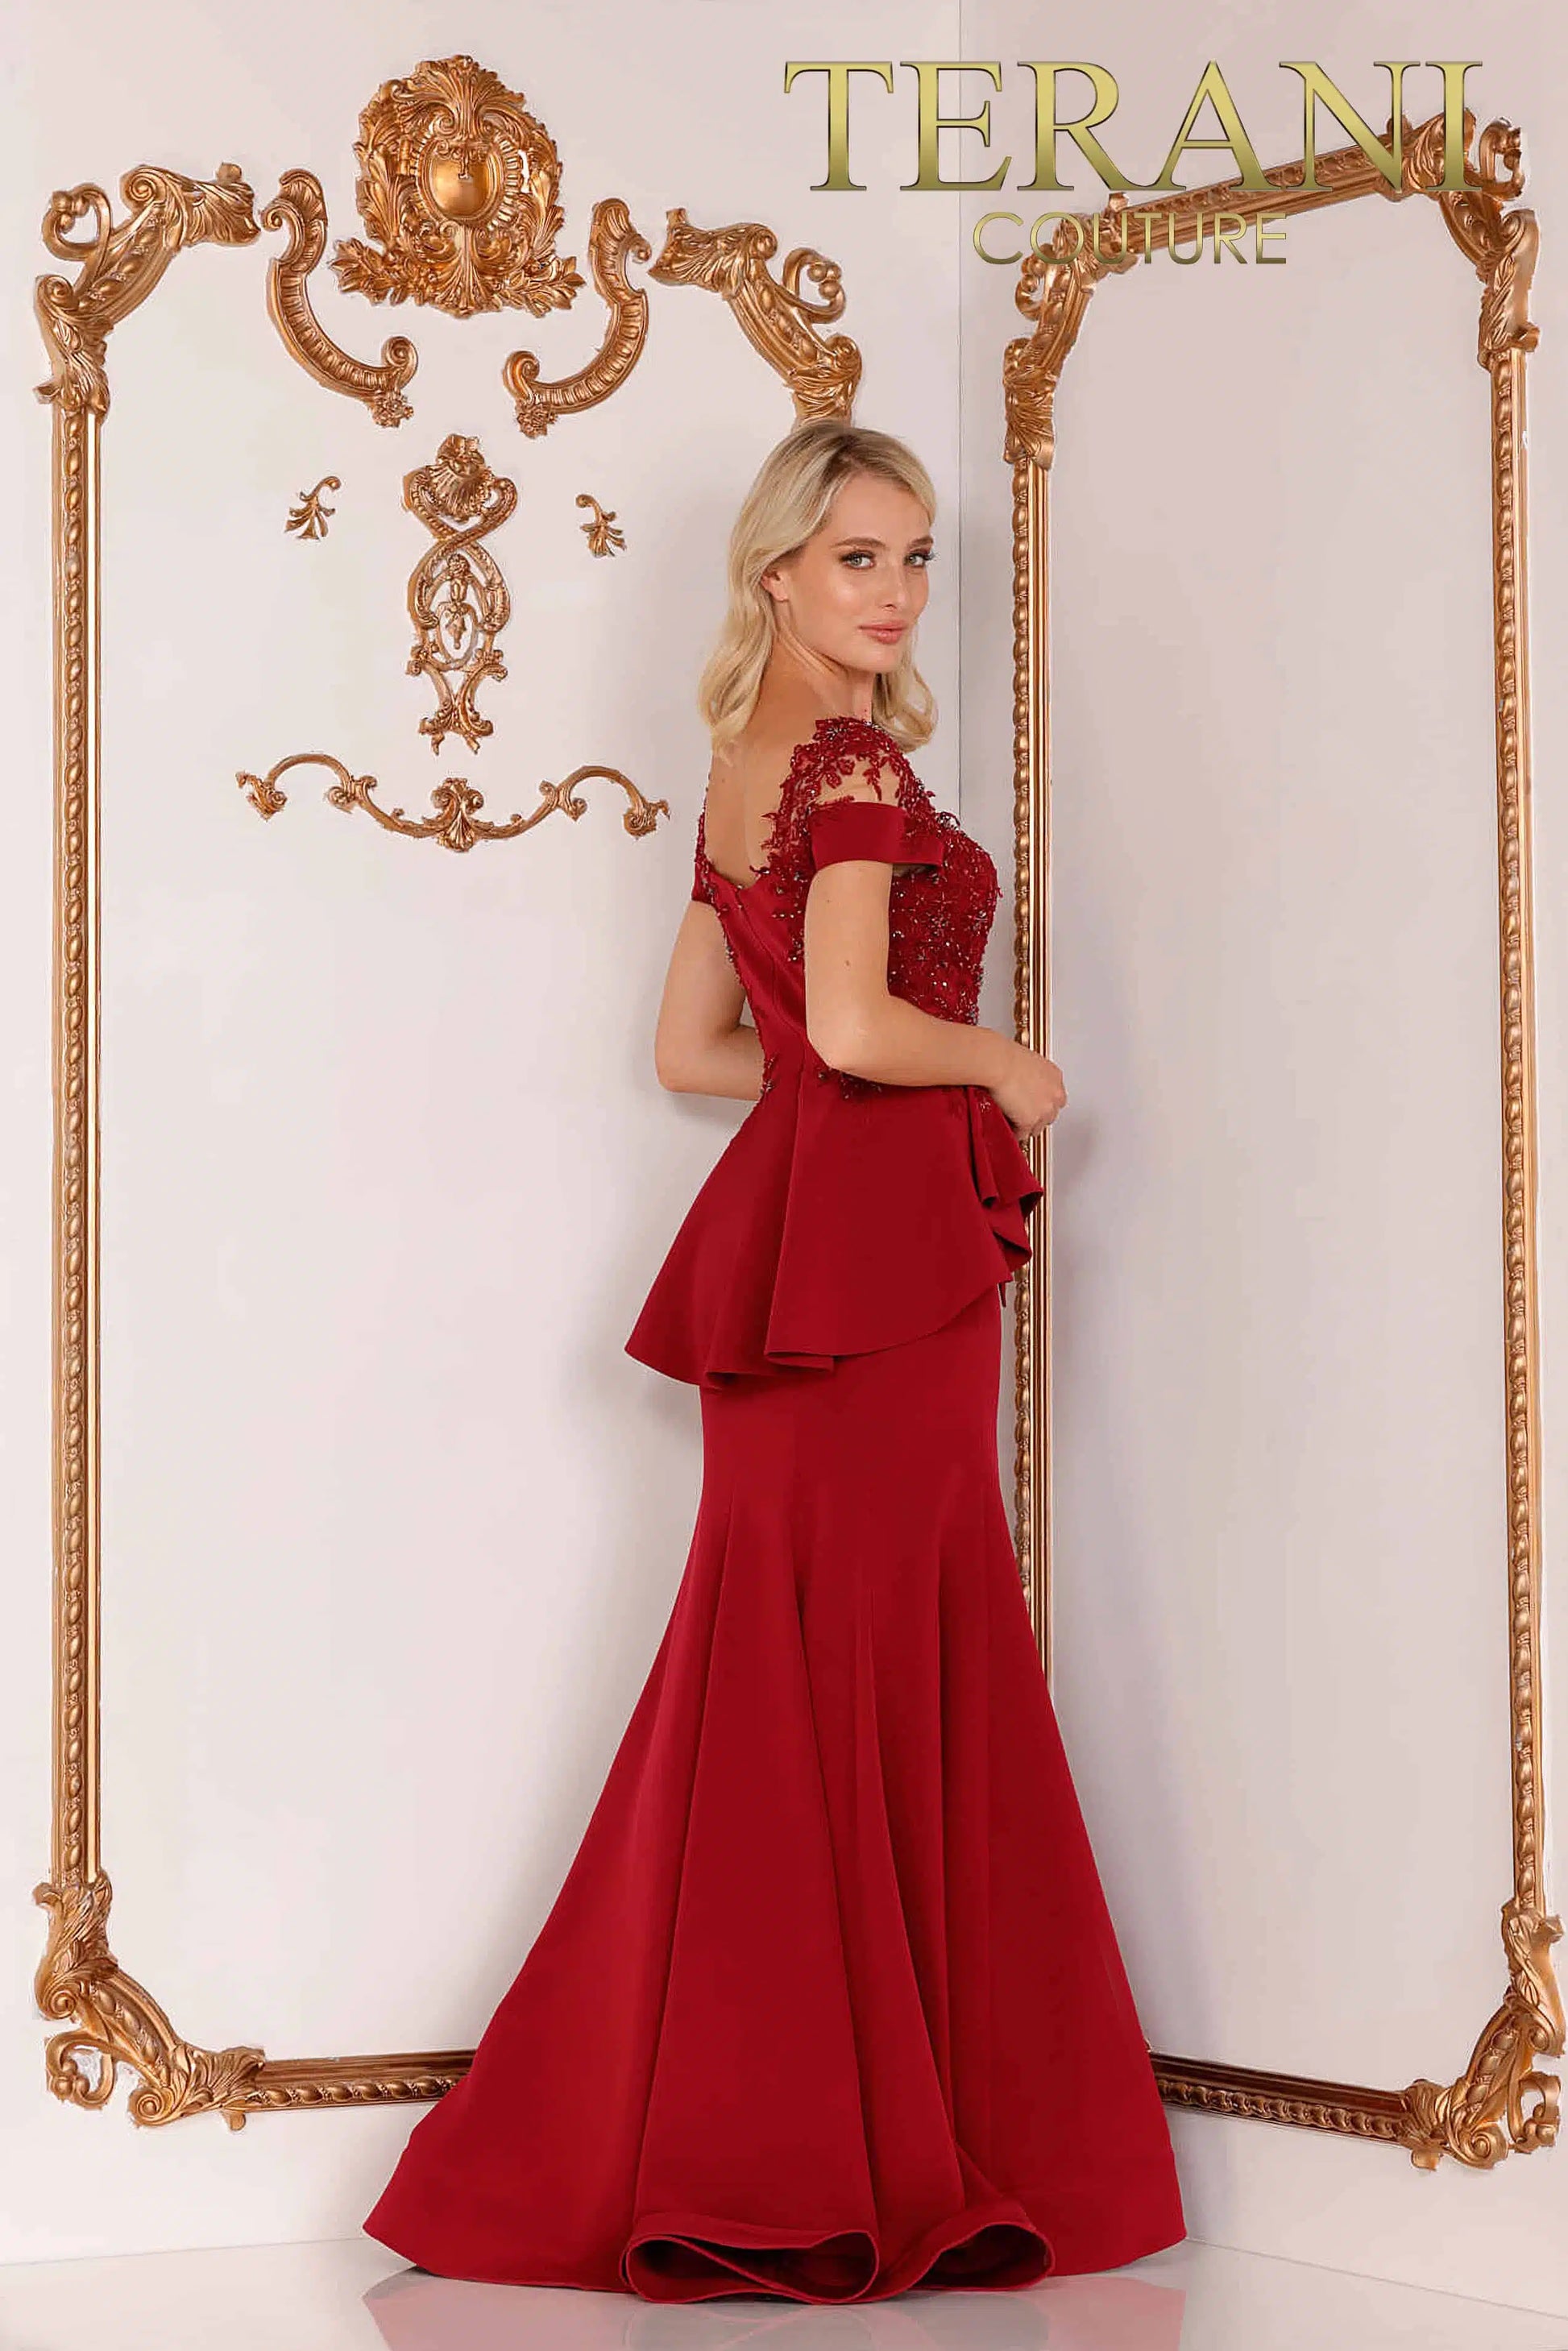 Terani-Couture-2111M5262-Short-Sleeve-Peplum-Long-Gown-Emerald-Red-Back-View - Rofial Beauty